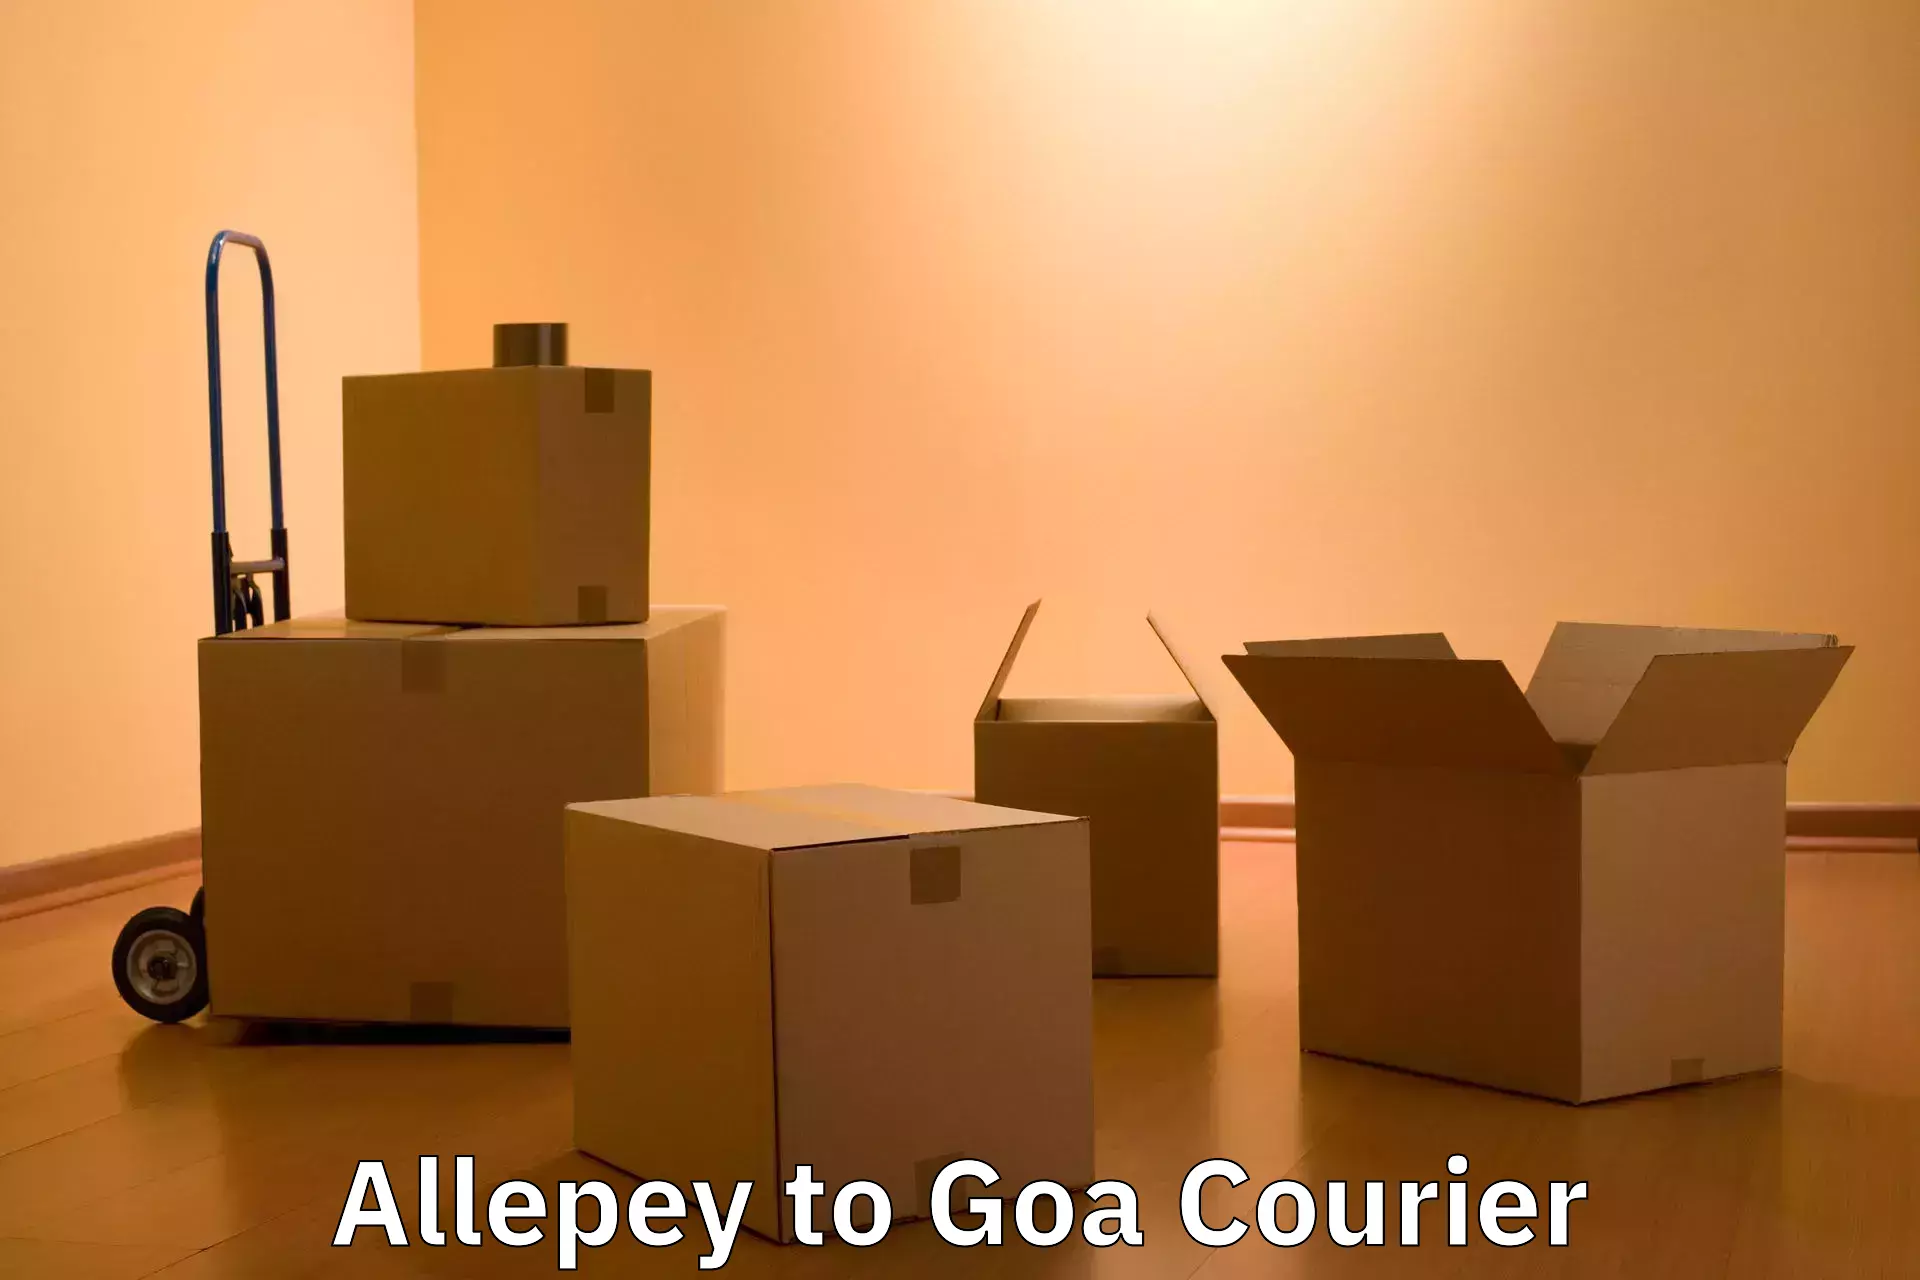 Luggage shipment specialists Allepey to Goa